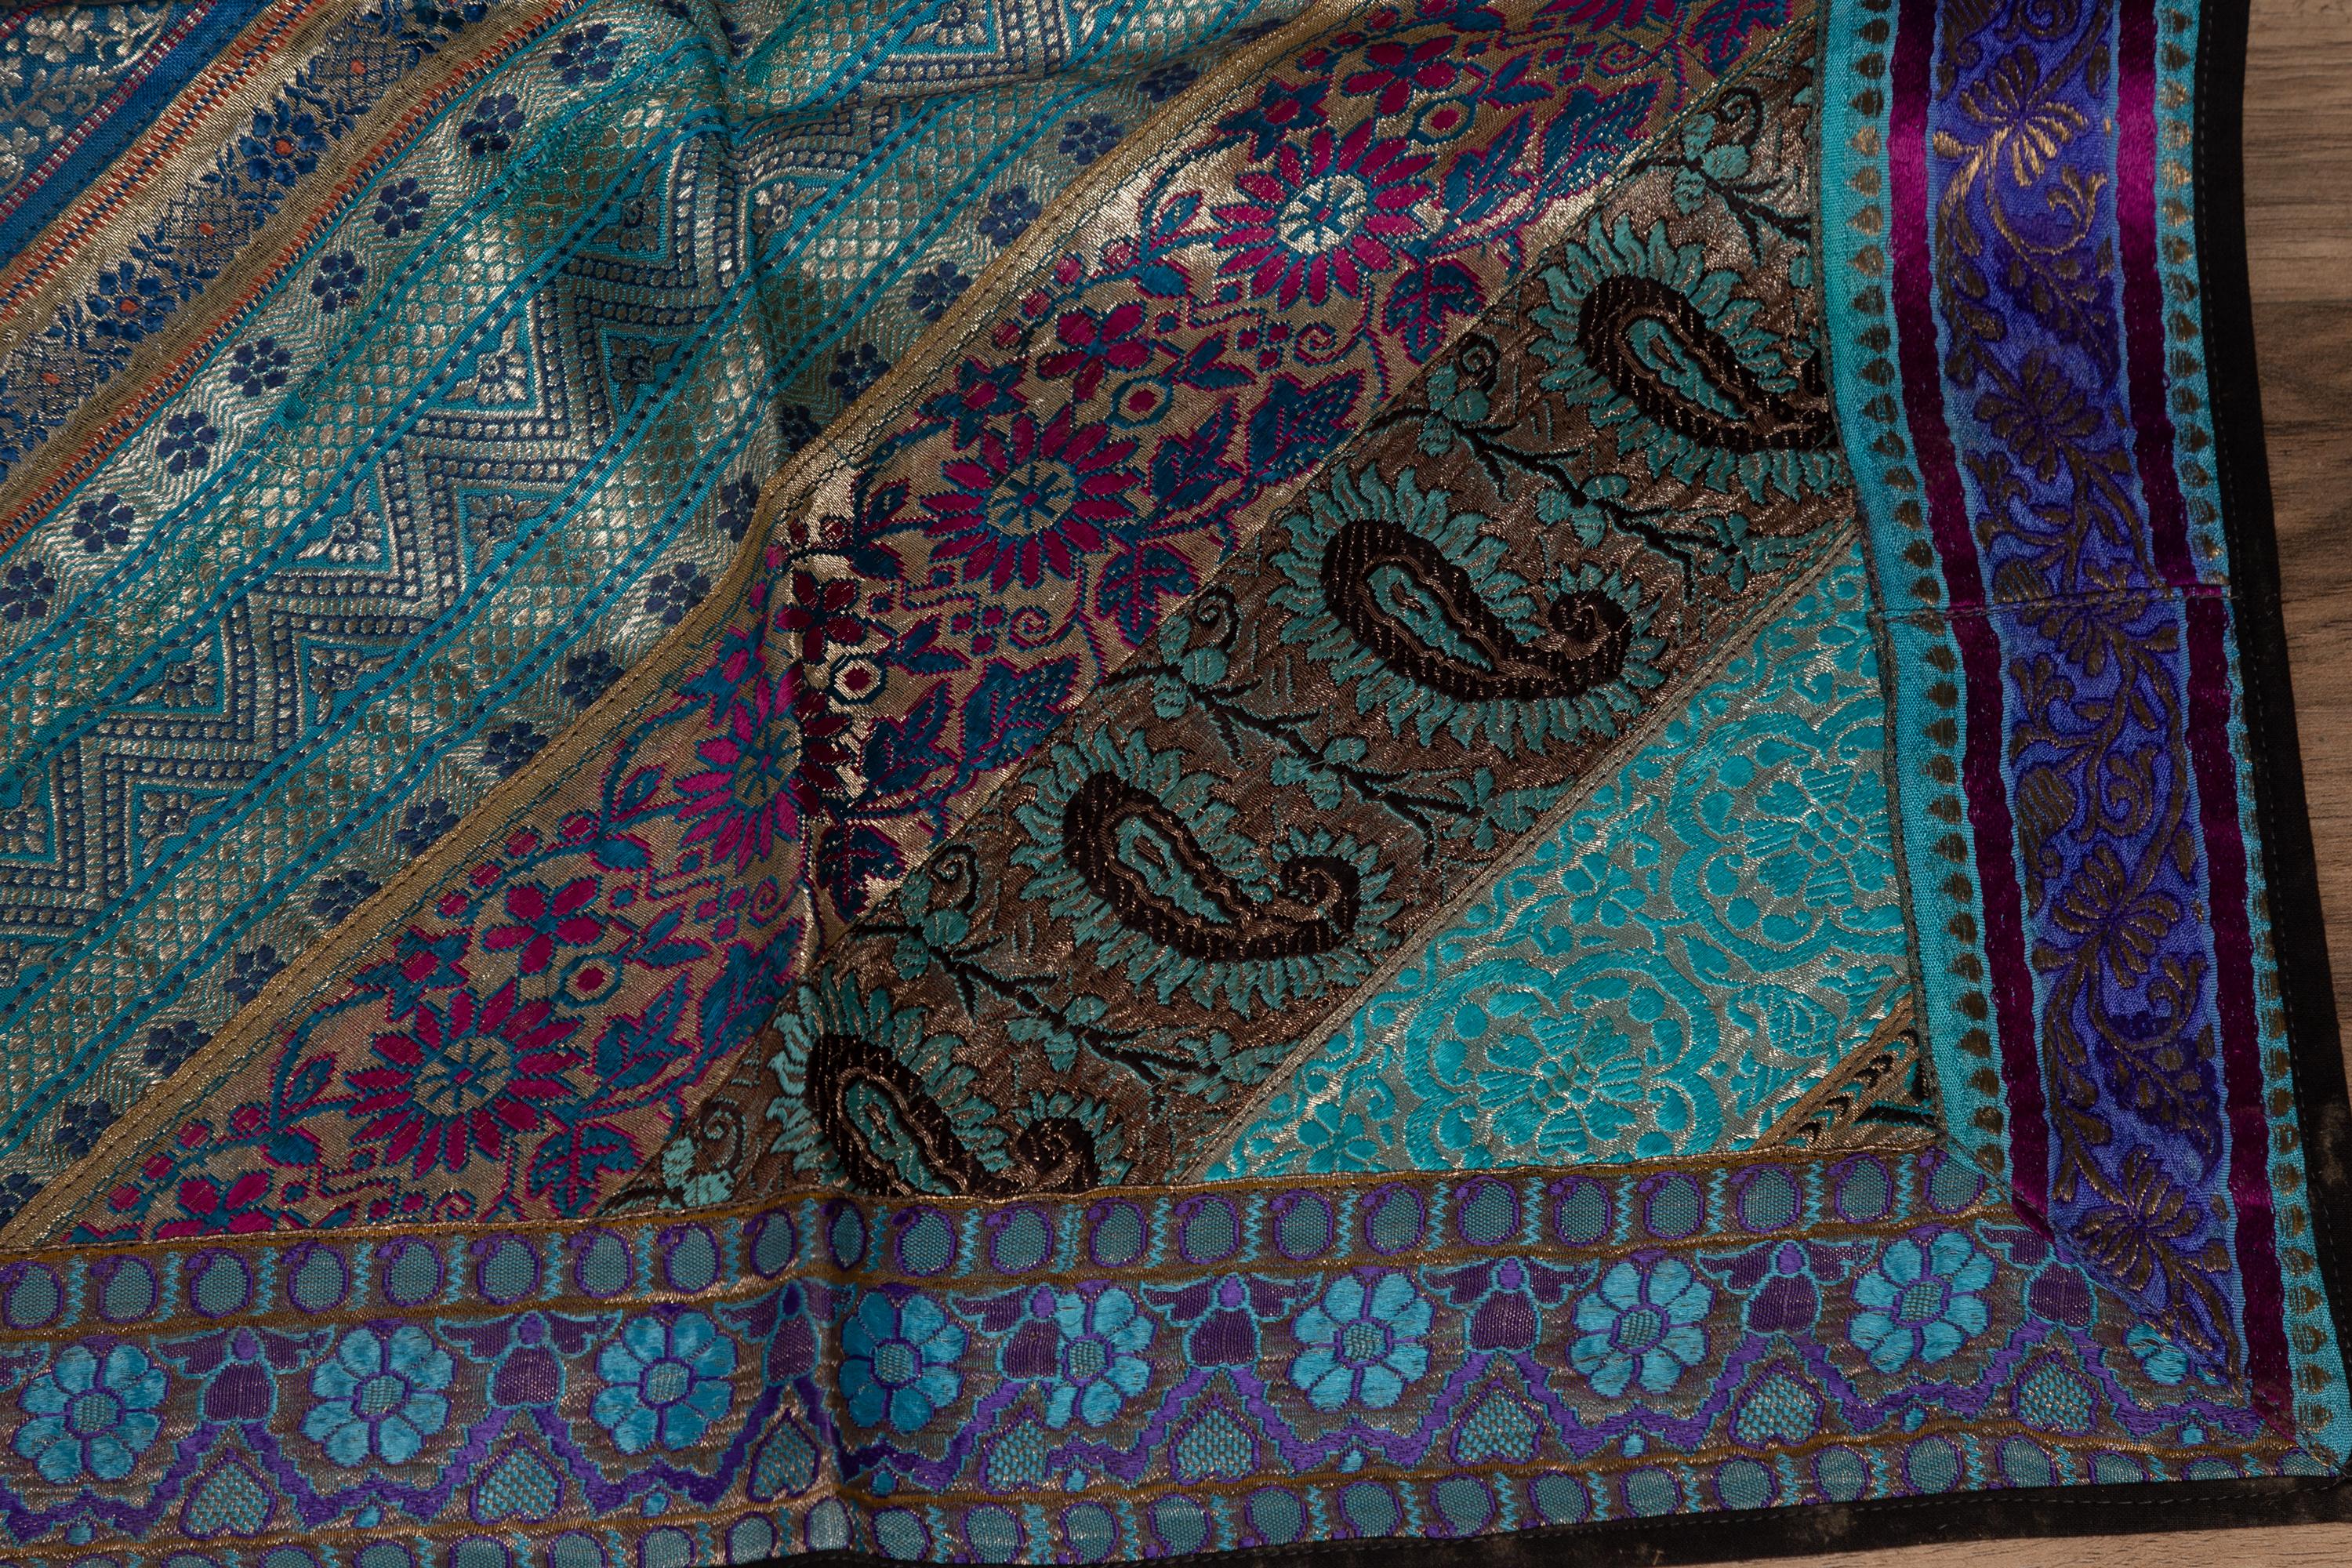 Vintage Indian Silk Embroidered Fabric with Turquoise, Violet and Gold Tones 1